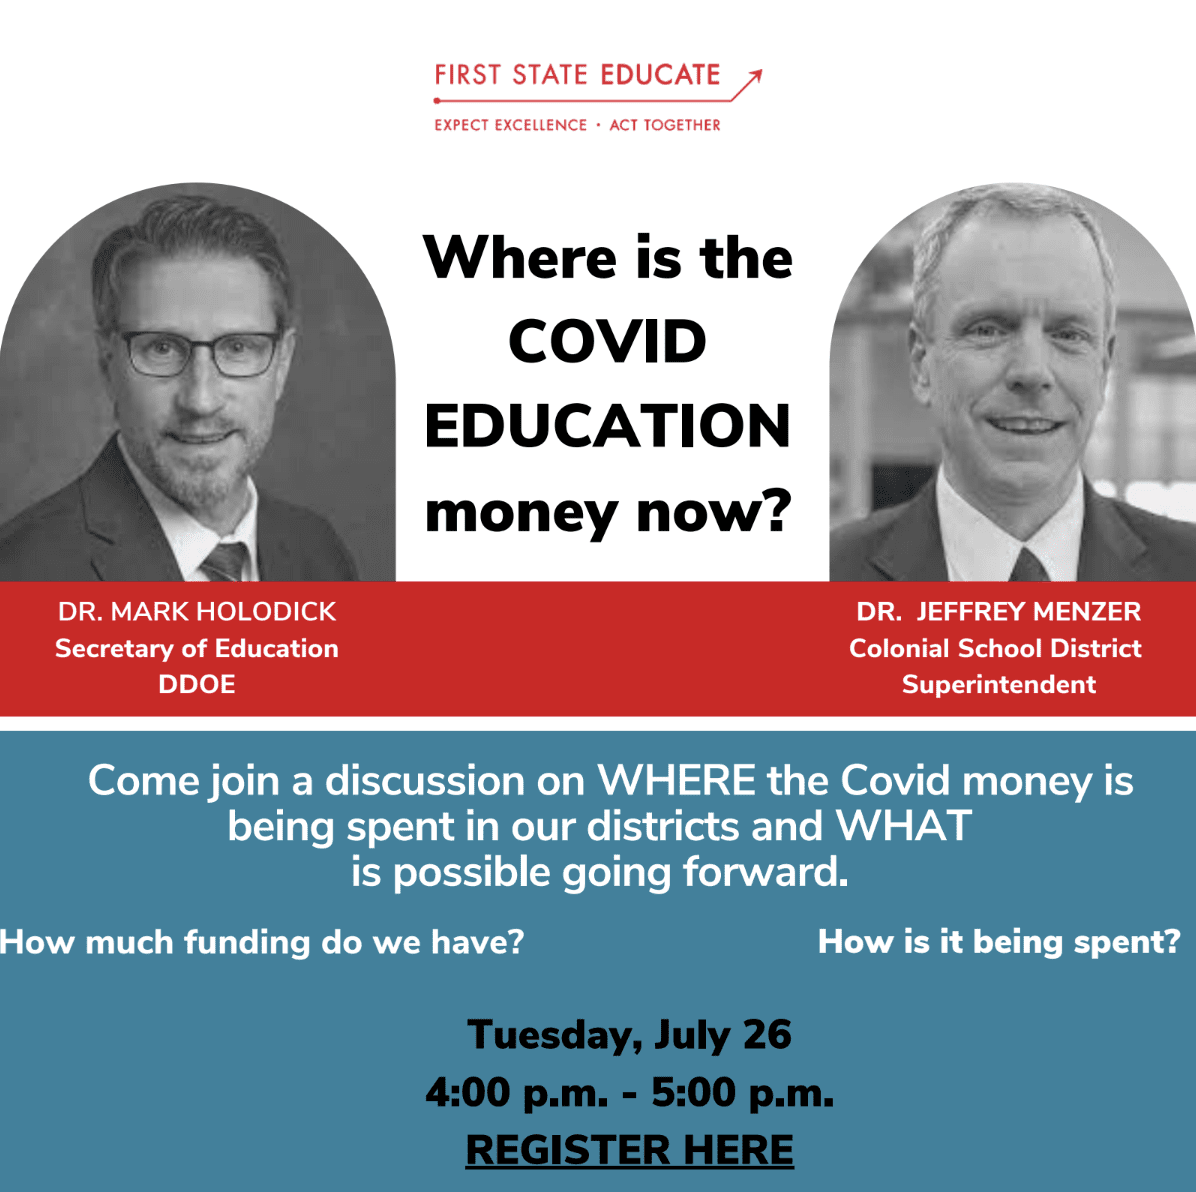 The first of a 2-part webinar series on COVID relief funds for schools will be hosted by First State Educate Tuesday from 4 p.m. to 5 p.m.